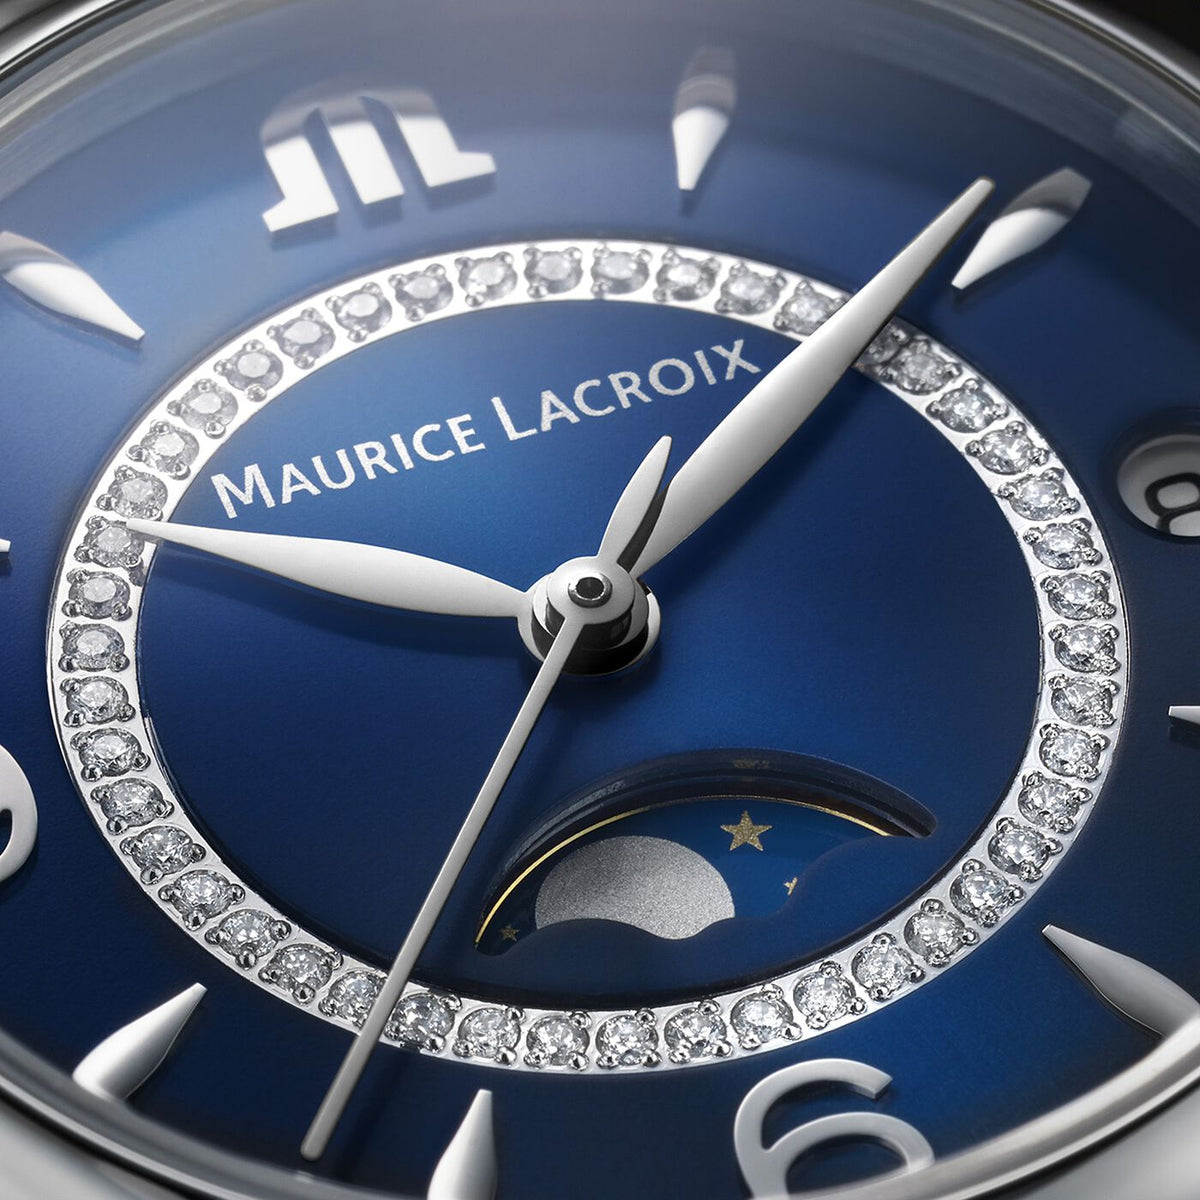 Maurice Lacroix Fiaba Moonphase 32mm FA1084-SS002-420-1